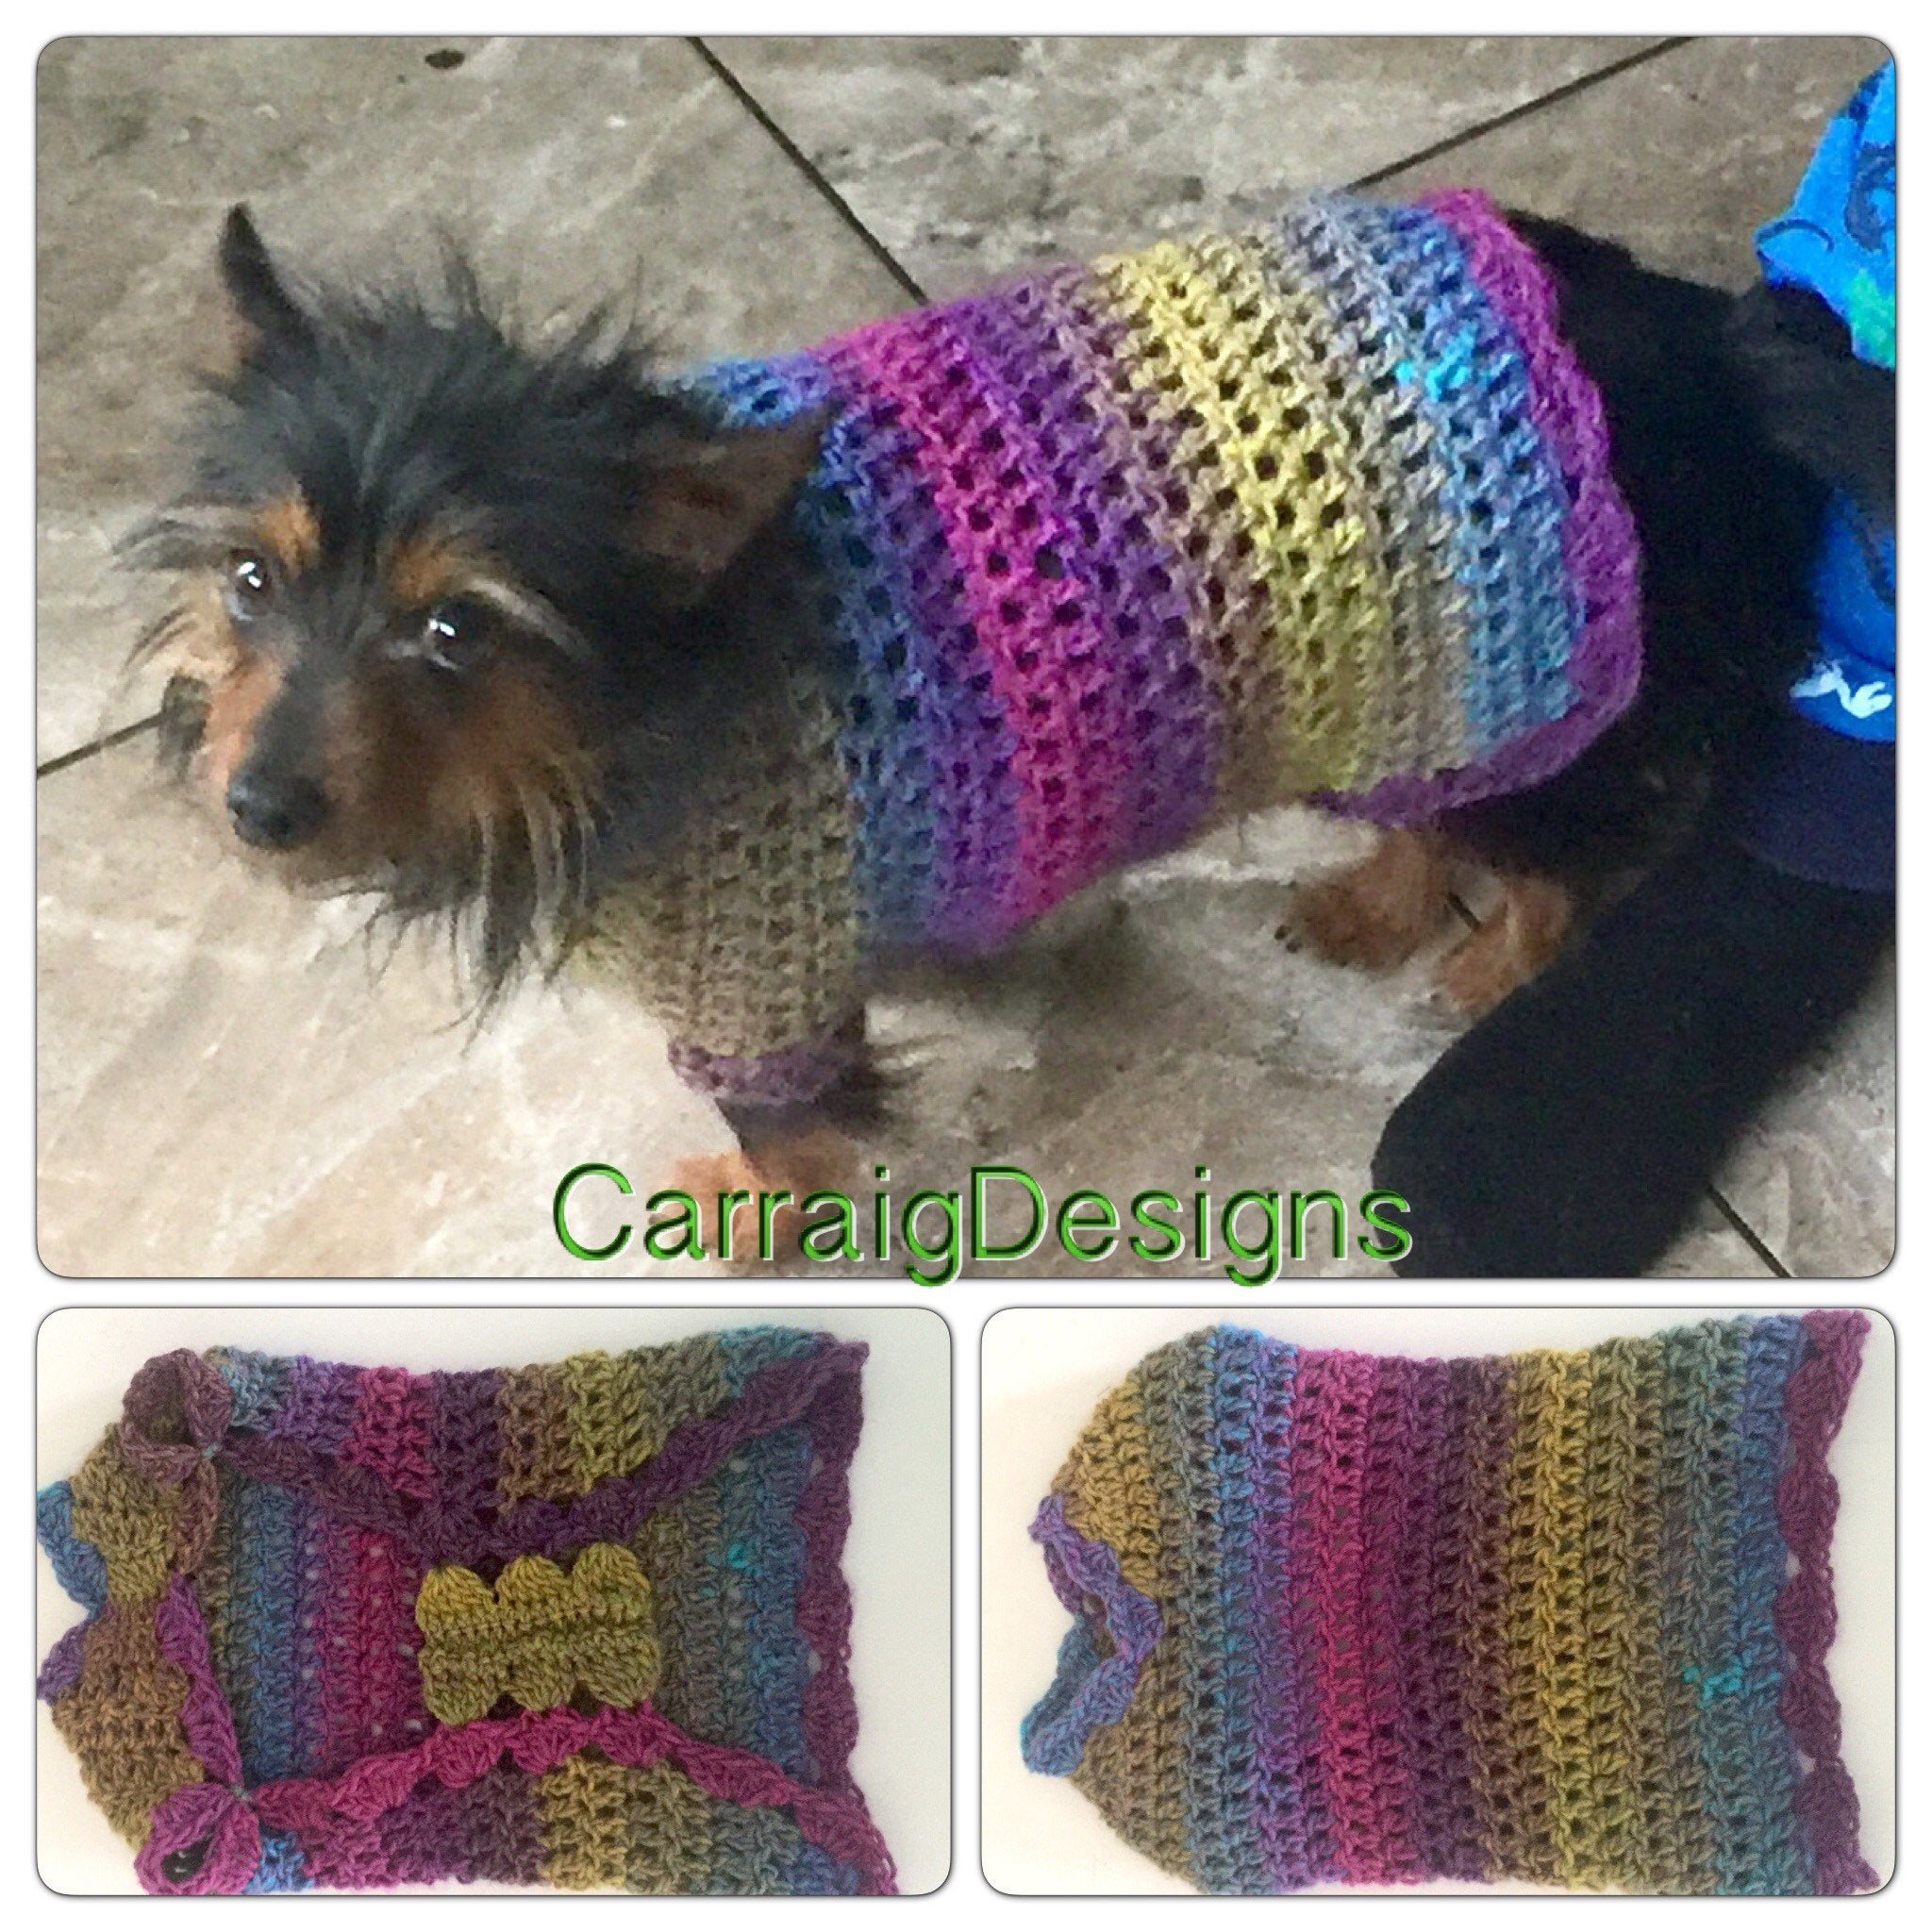 Free Knitting Pattern For Small Dog Coat Small Dog Hippy Coat Sweater Costume Dress Up Unique Designer Hand Crochet Knit Hippie Boho Rainbow Gift Accessories Puppy Clothes Matching